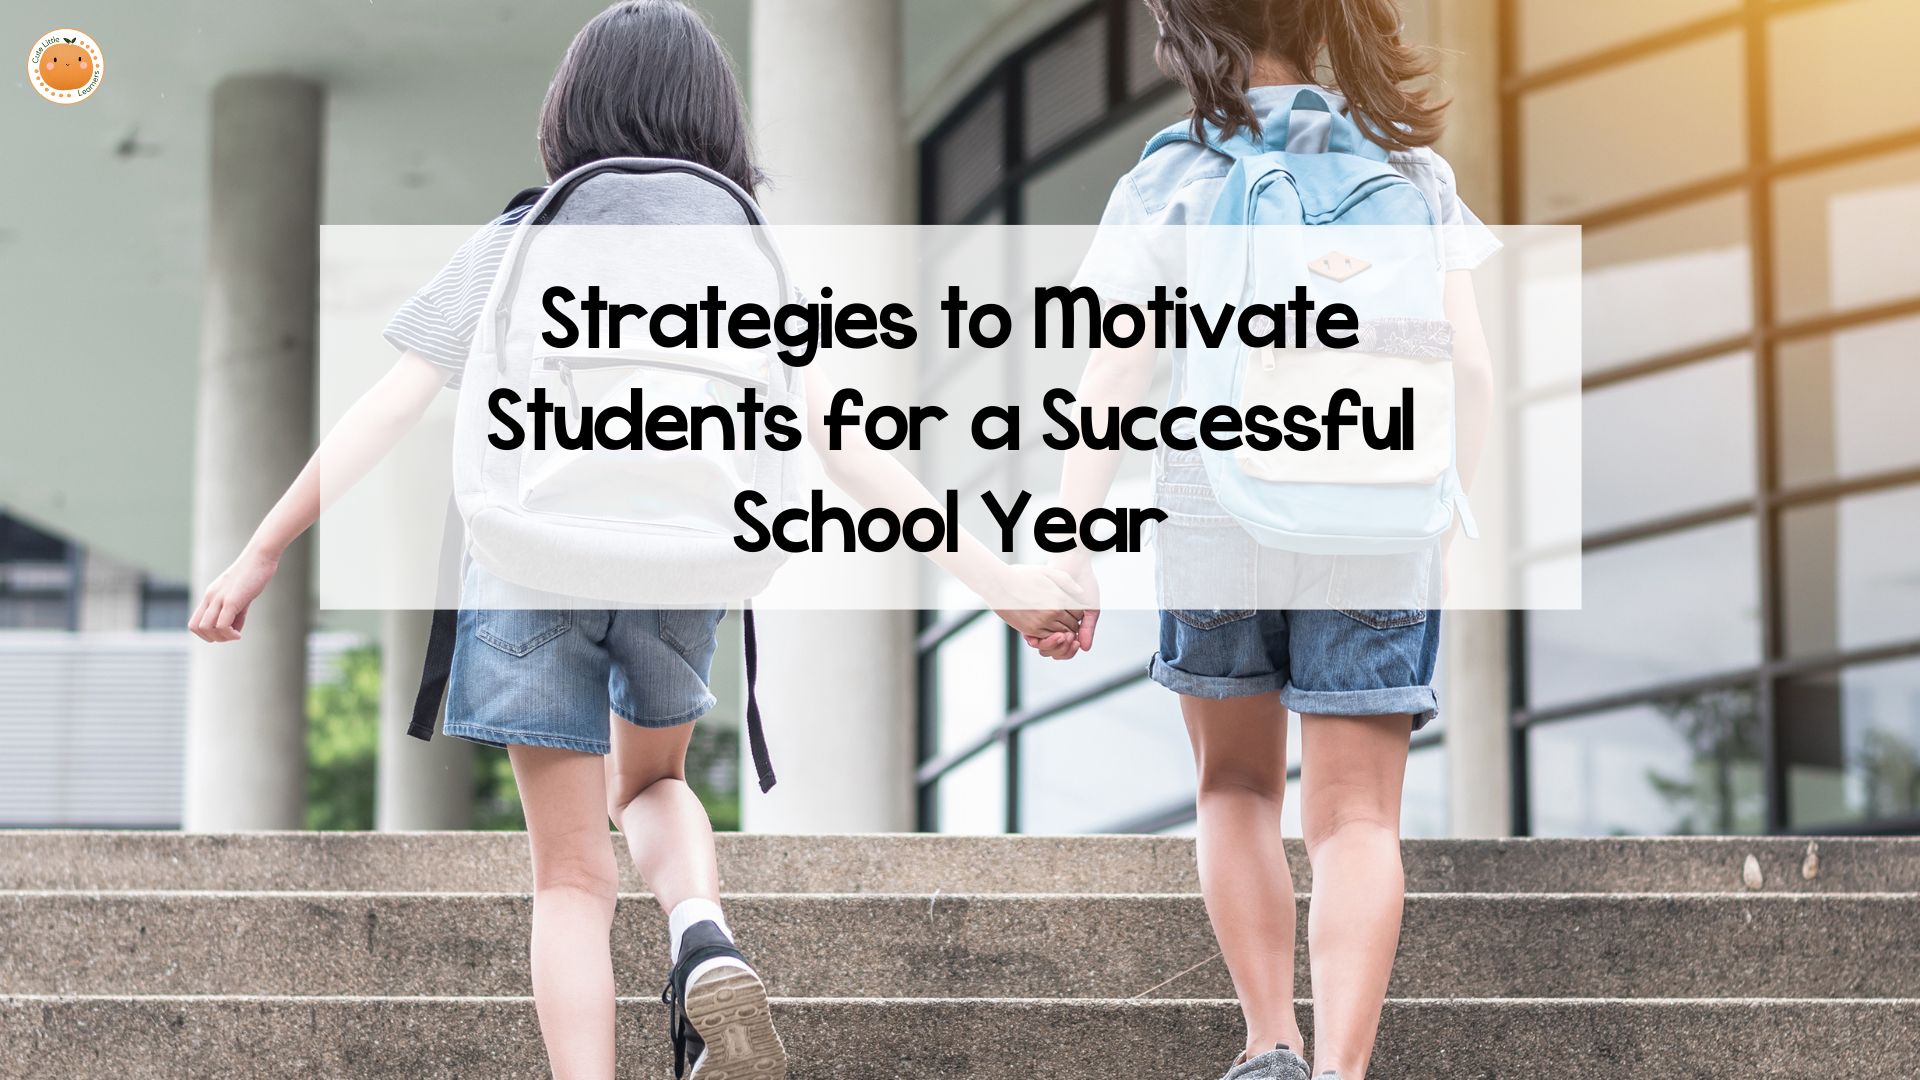 Strategies to Motivate Students for a Successful School Year